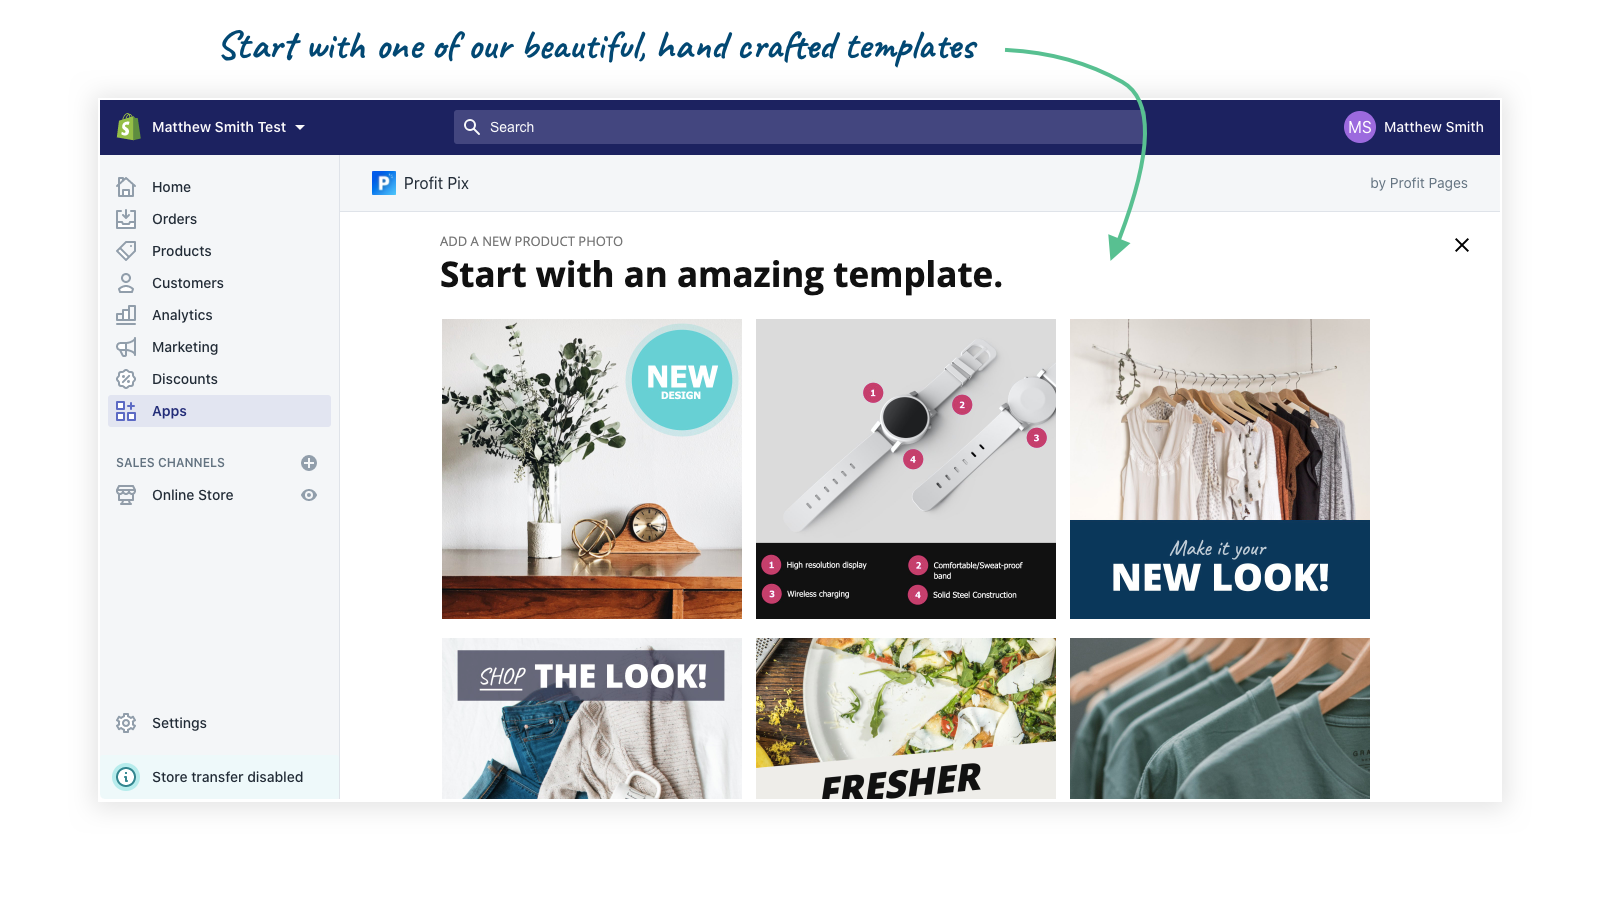 Get a head start with our amazing templates.